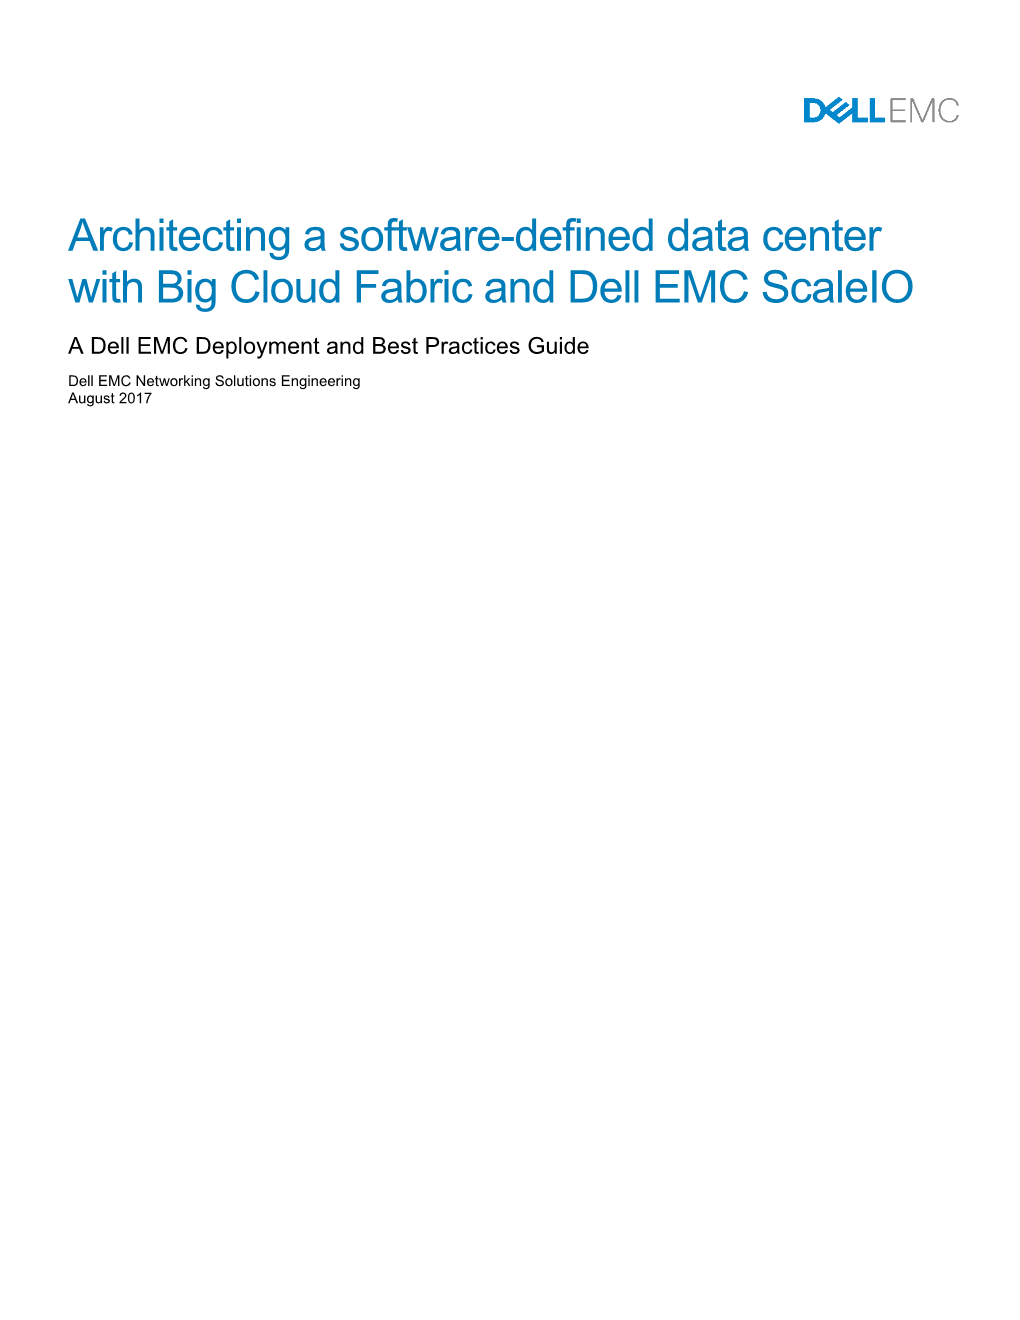 Architecting a Software-Defined Data Center with Big Cloud Fabric and Dell EMC Scaleio